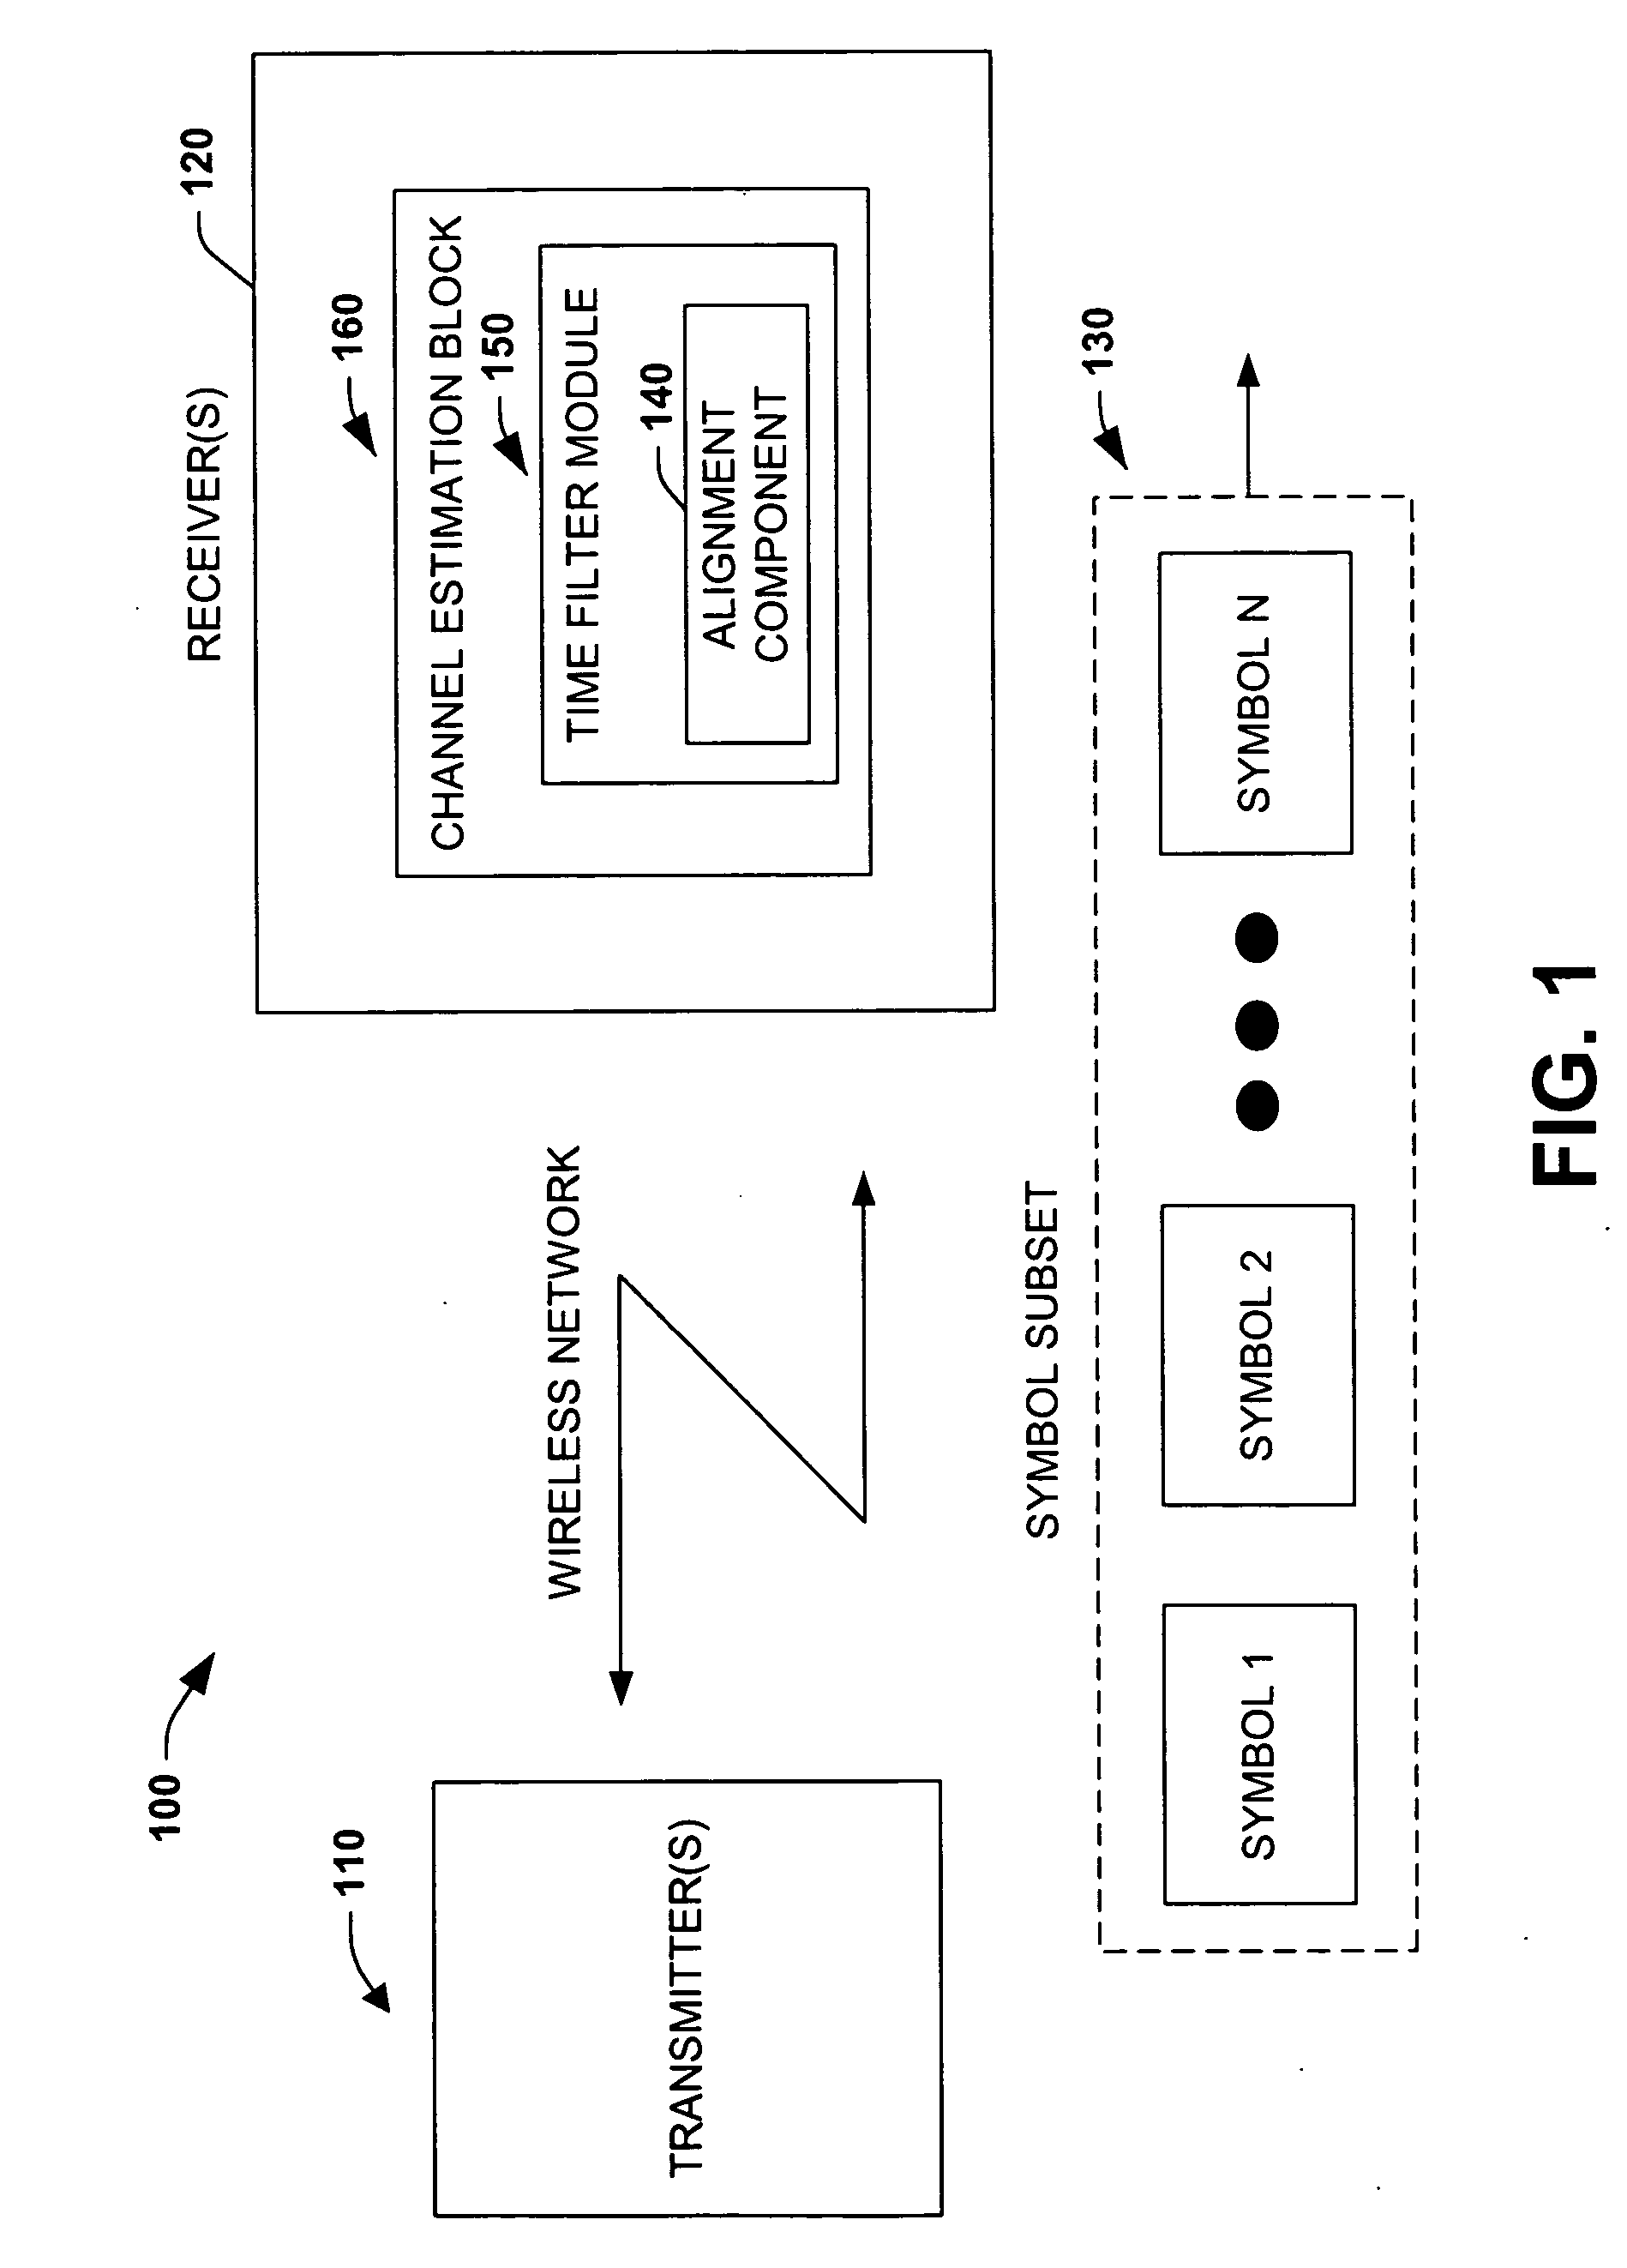 Timing corrections in a multi carrier system and propagation to a channel estimation time filter